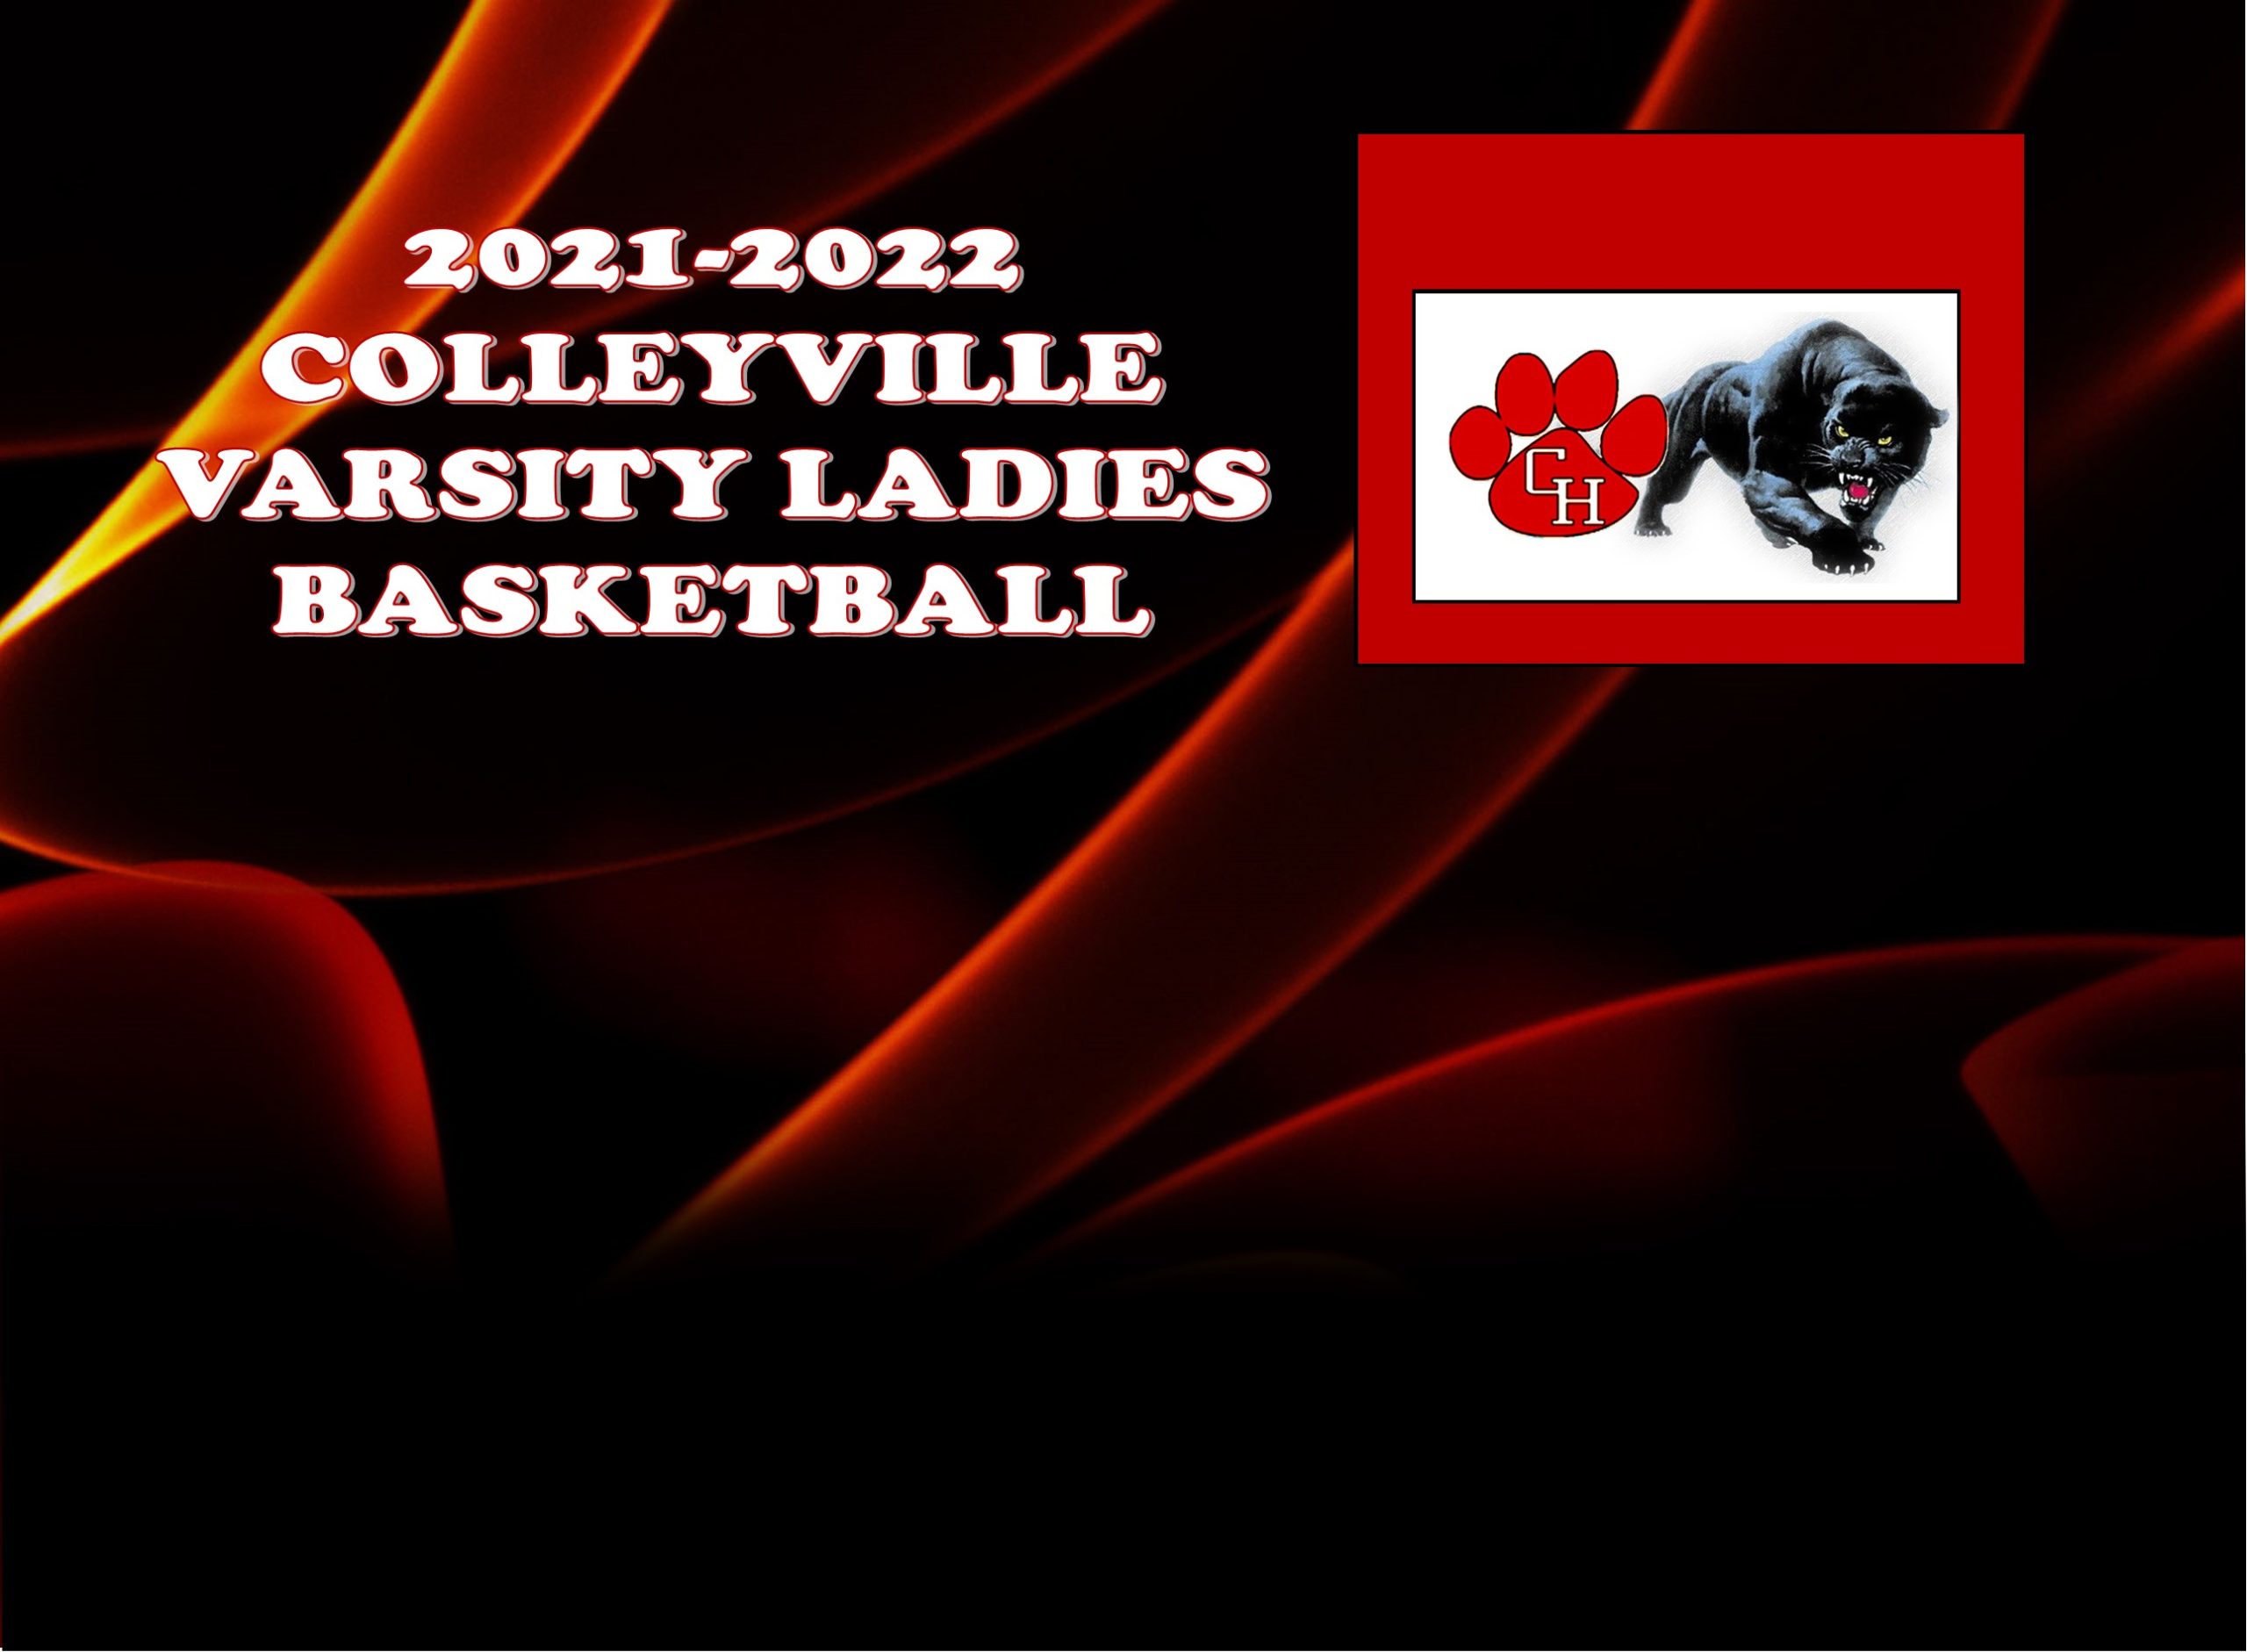 GCISD Basketball: Colleyville Lady Panthers Were Unseated by The Lake Dallas Lady Falcons 48-37